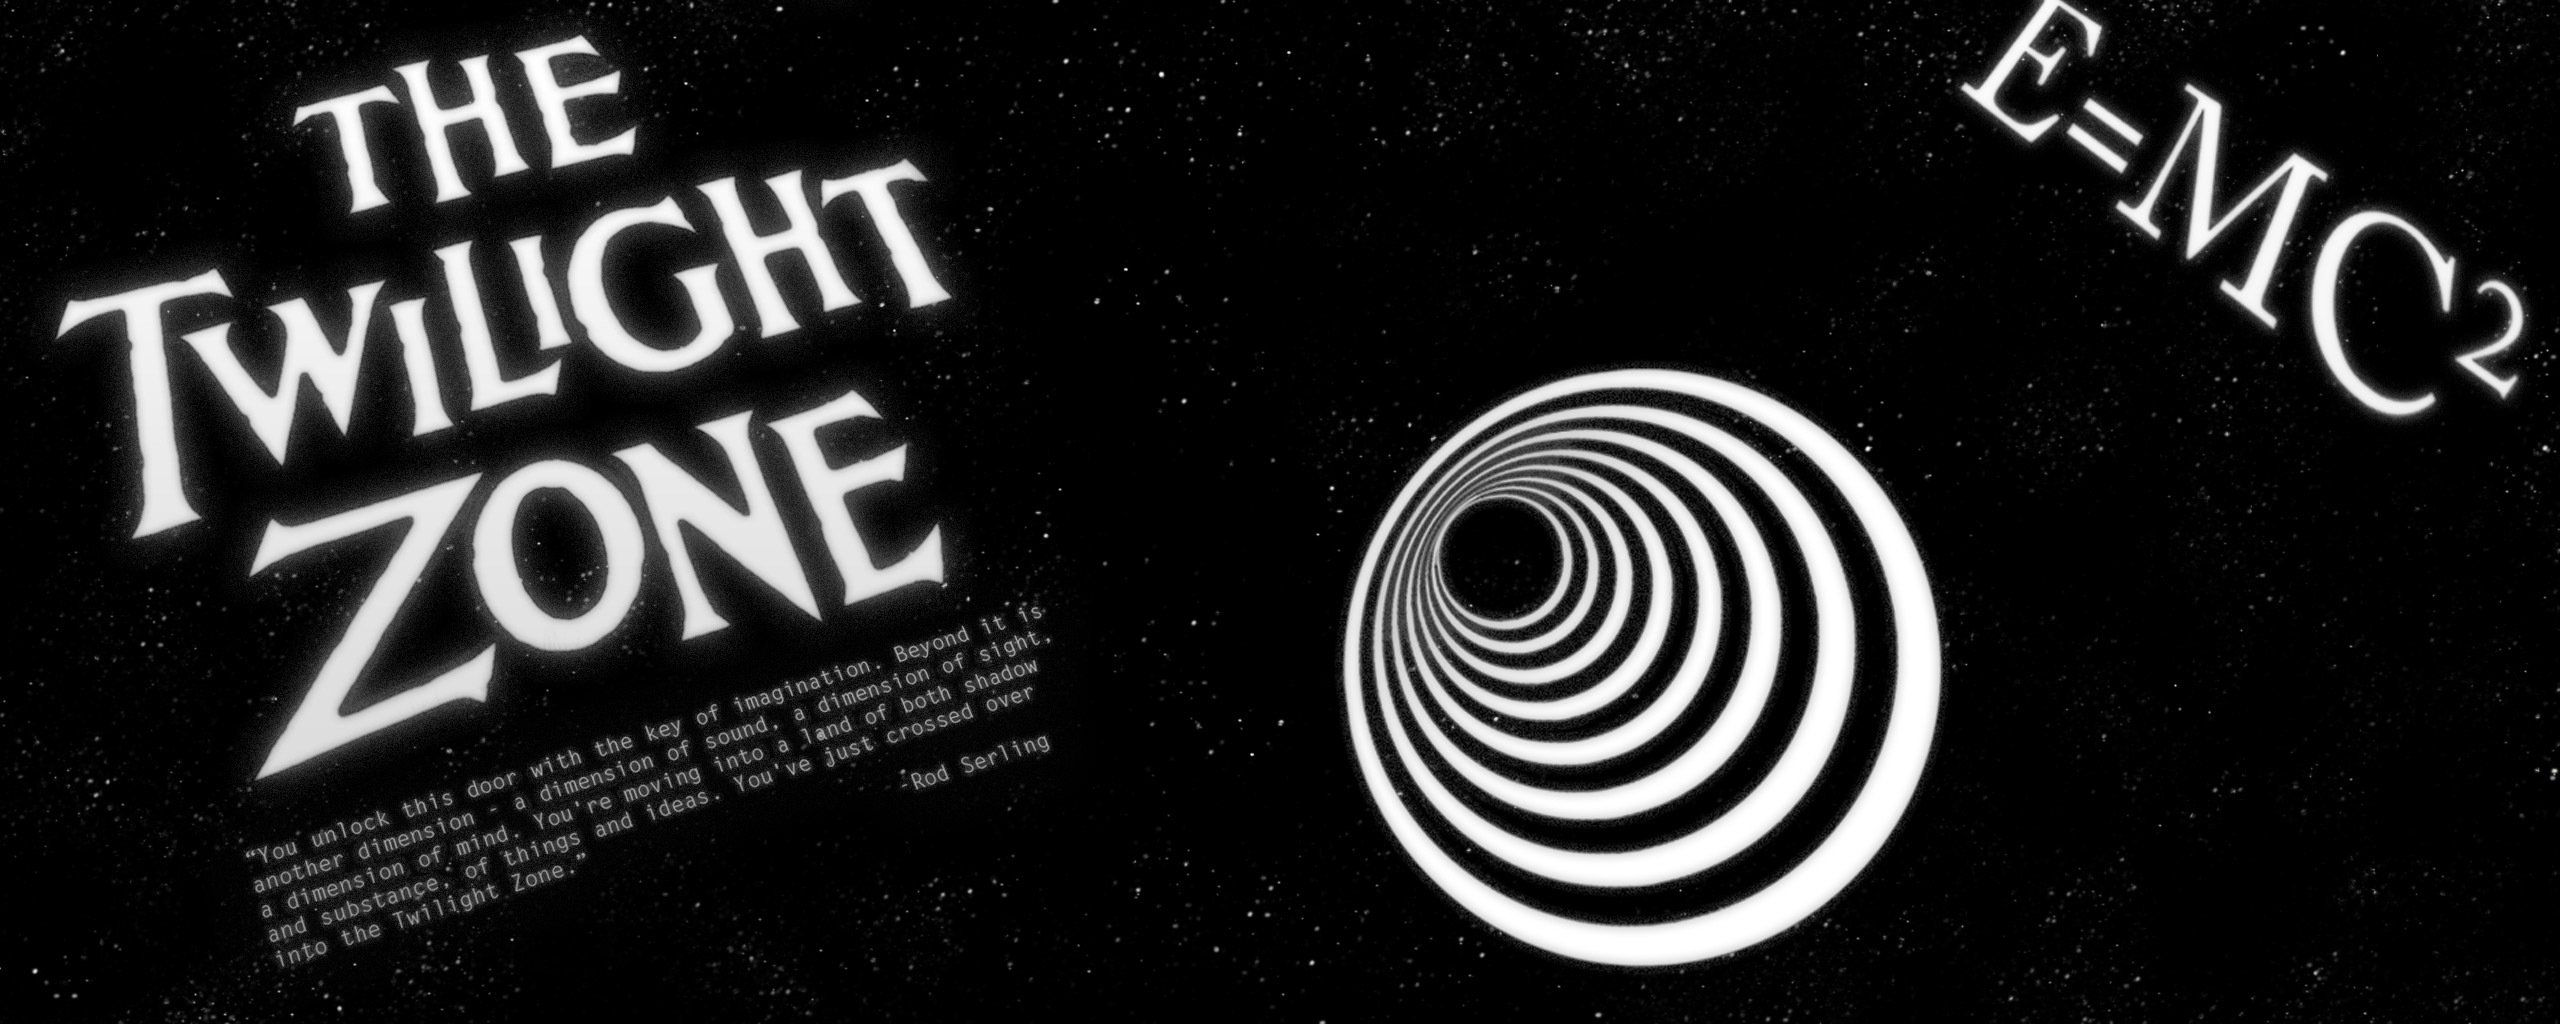 The Twilight Zone Square Wallpapers